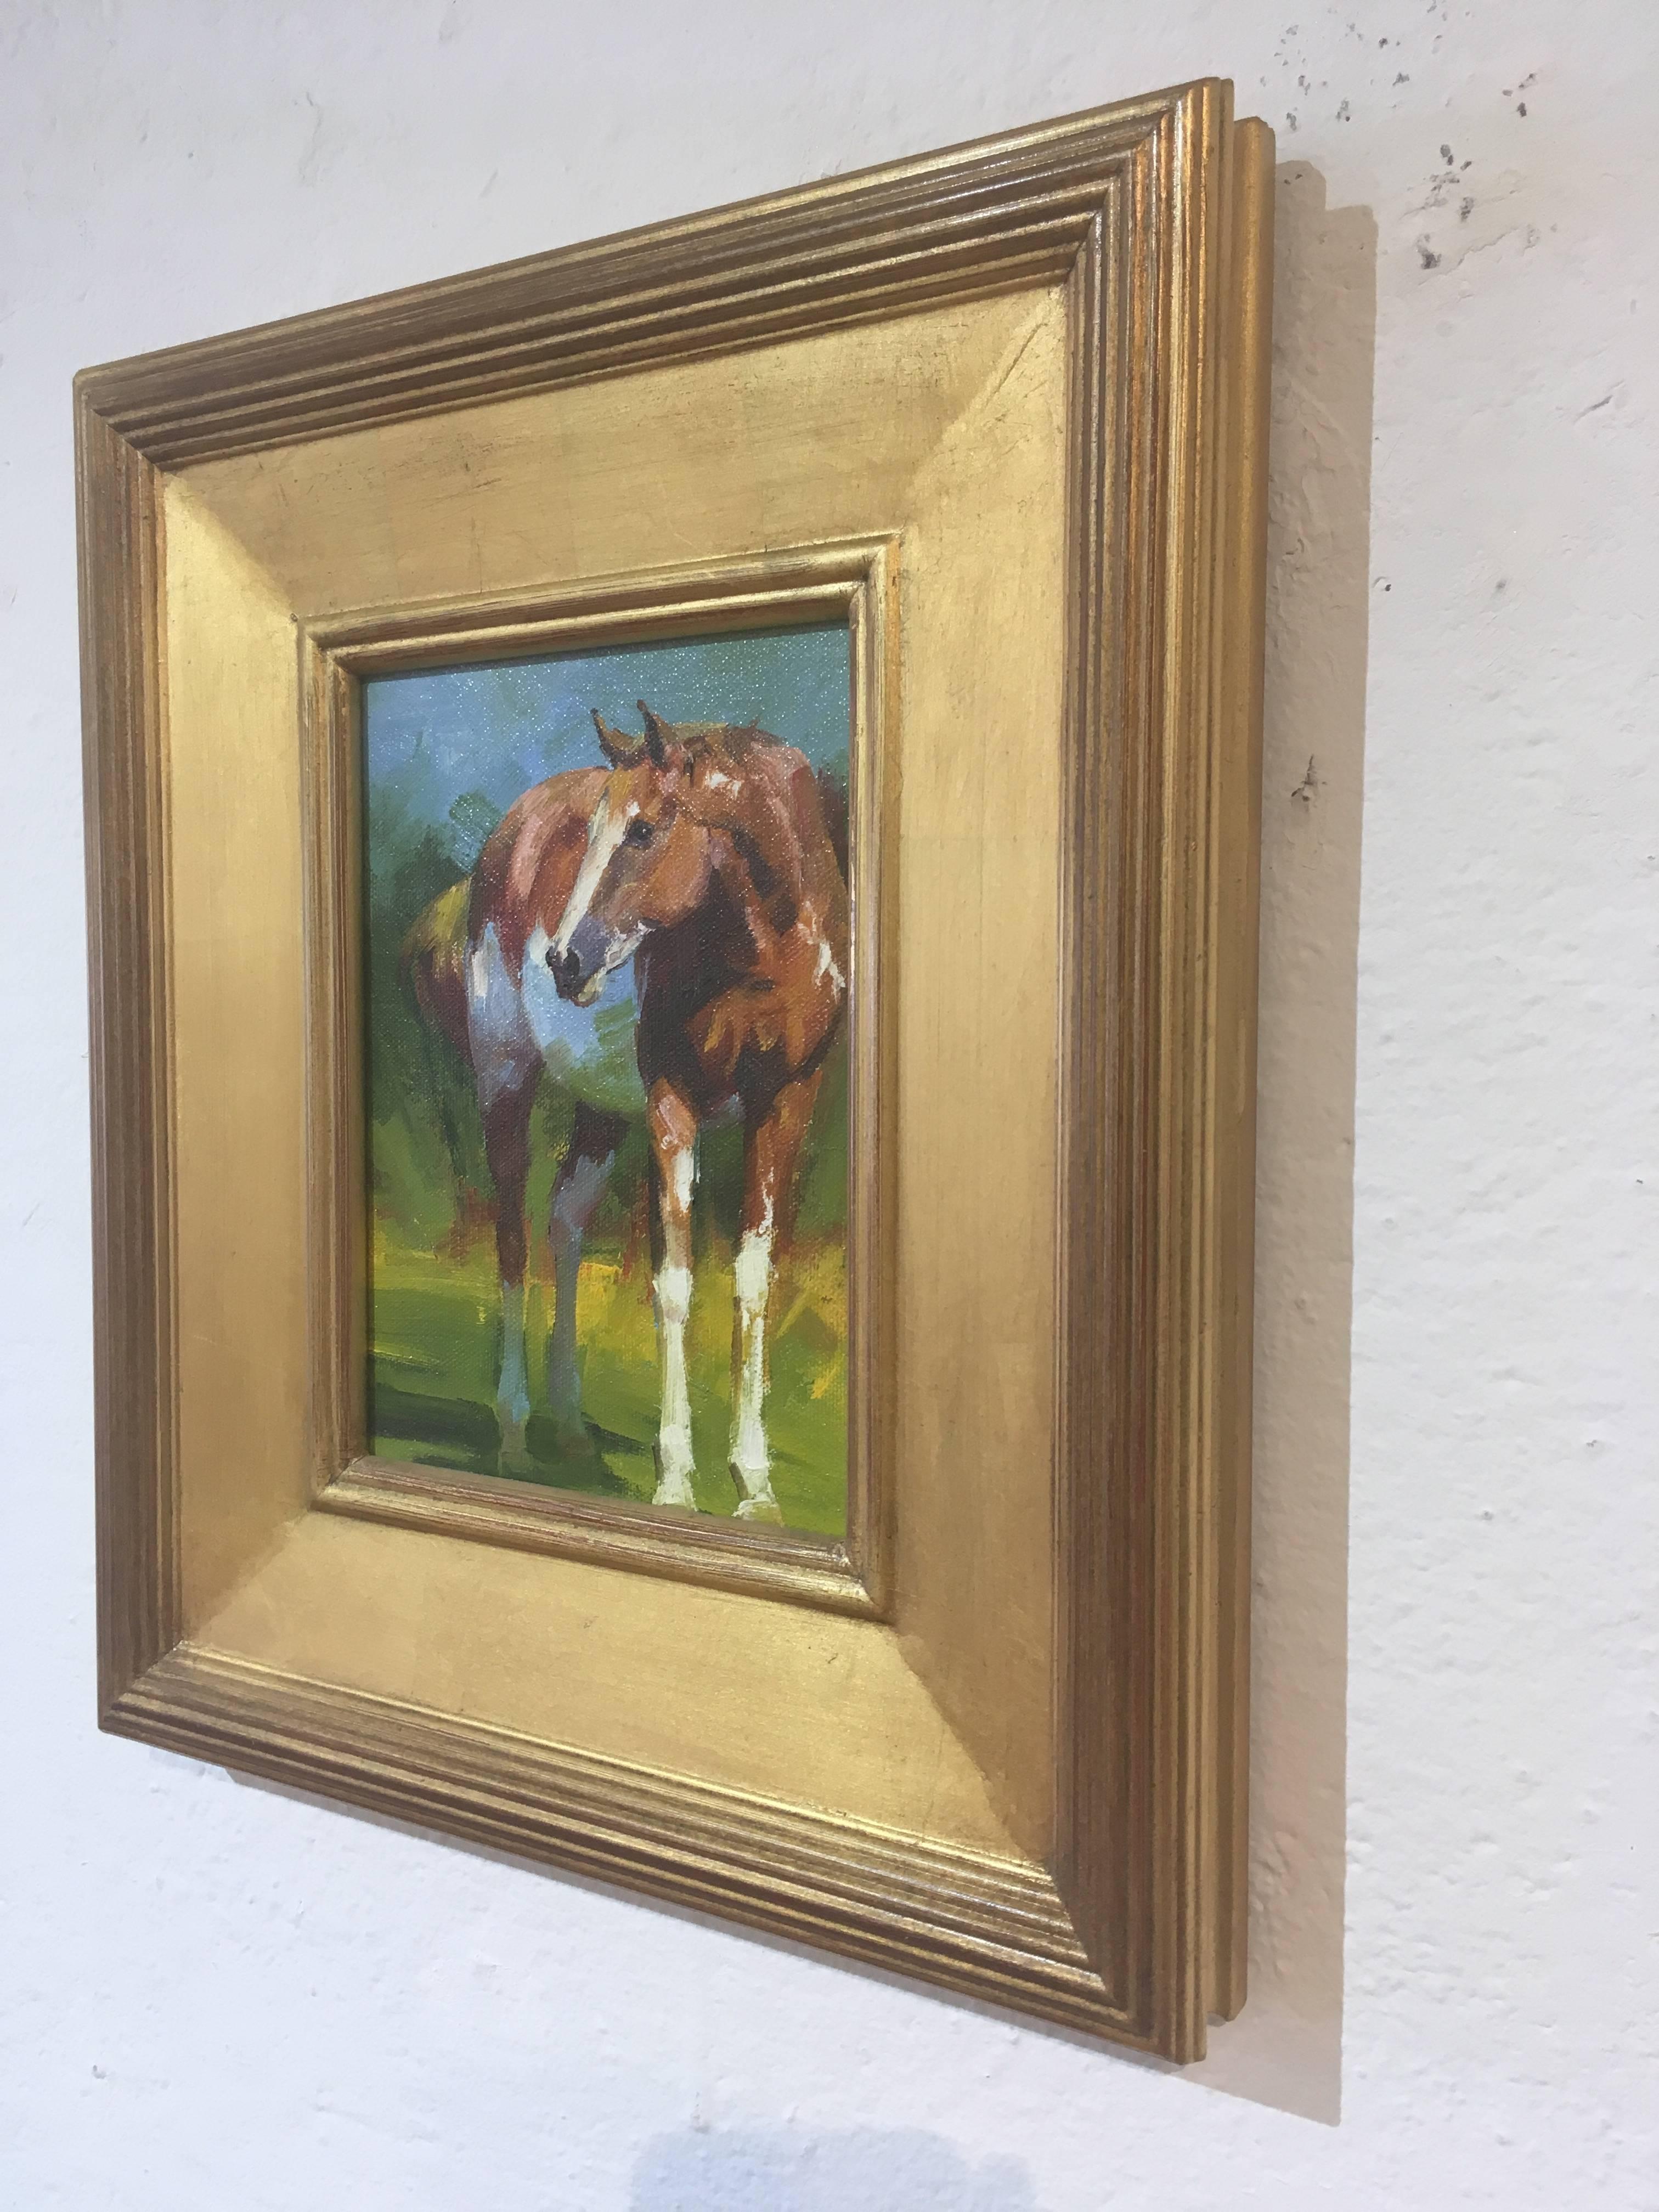 This is an oil painting single paint pony standing with its head lowered. It's body is positioned at a three-quarter view. The white and tan horse standing in dappled sunlight in a grassy field with implied trees and a blue sky. To view more images,